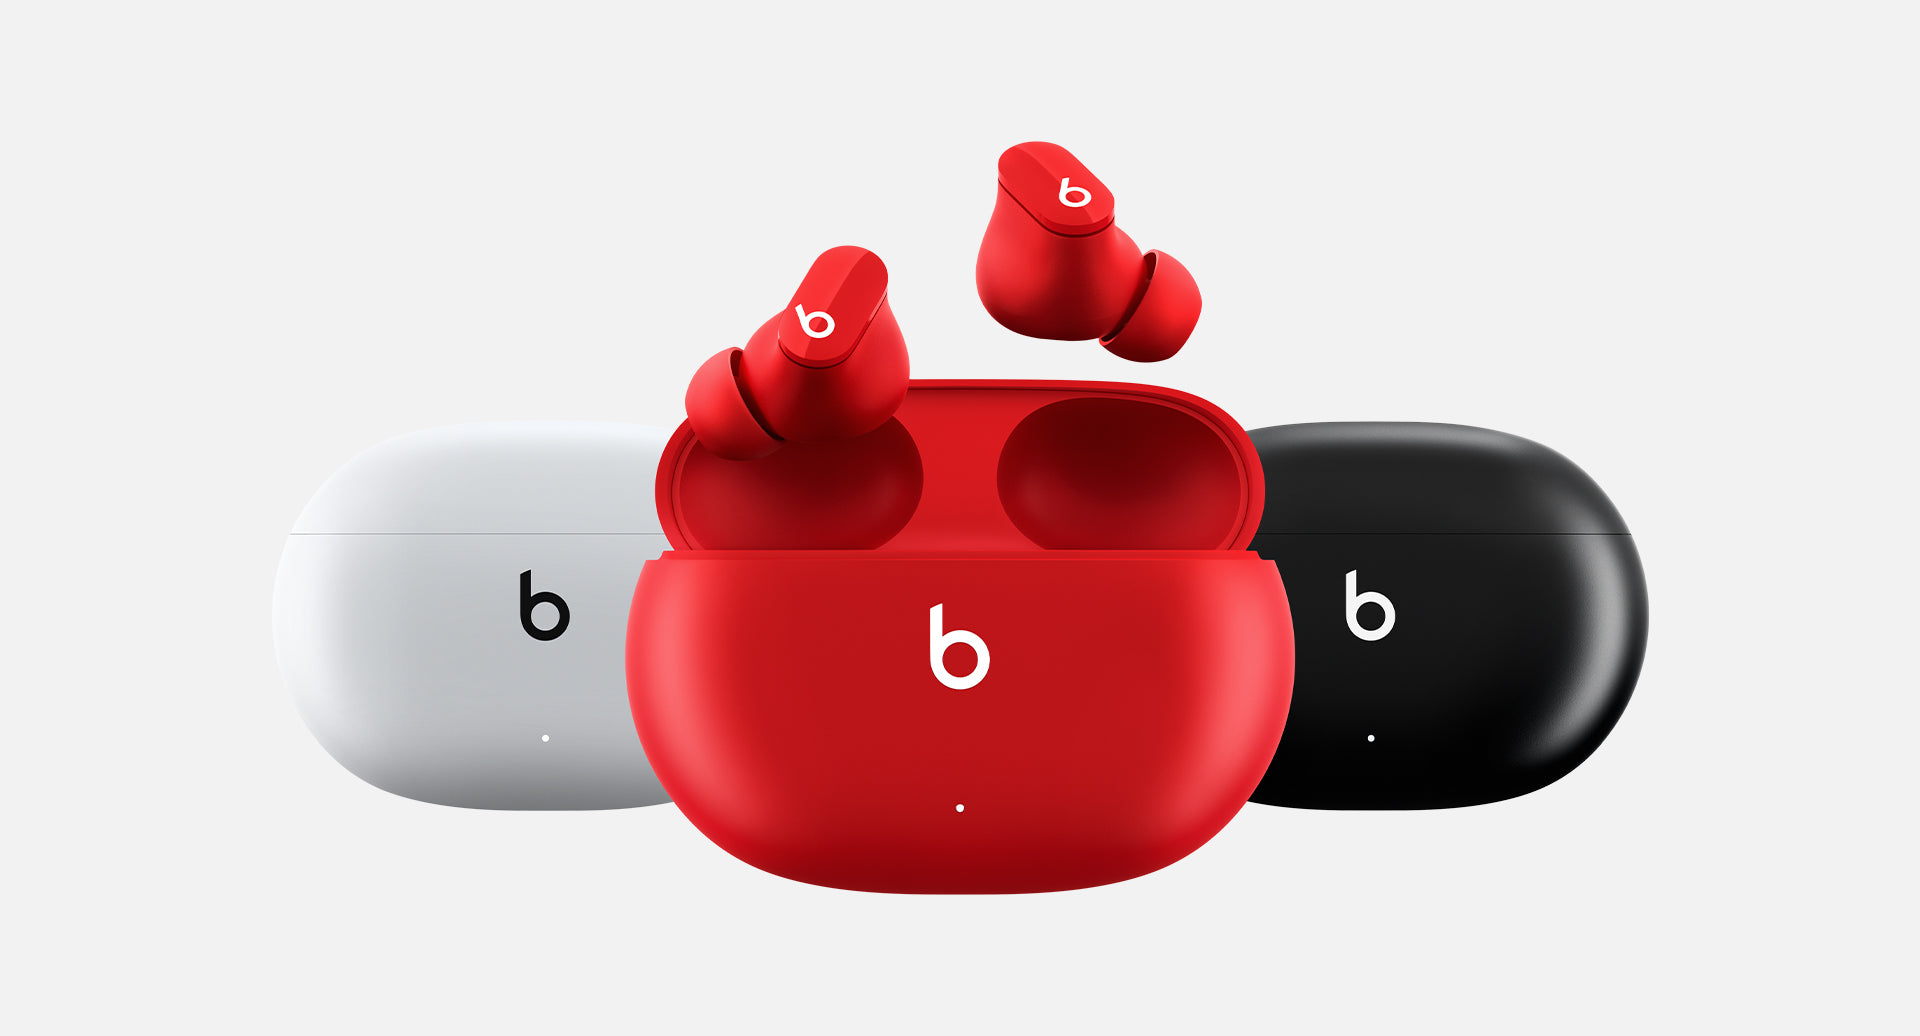 Pure and Powerful Sound with Beats Studio Buds